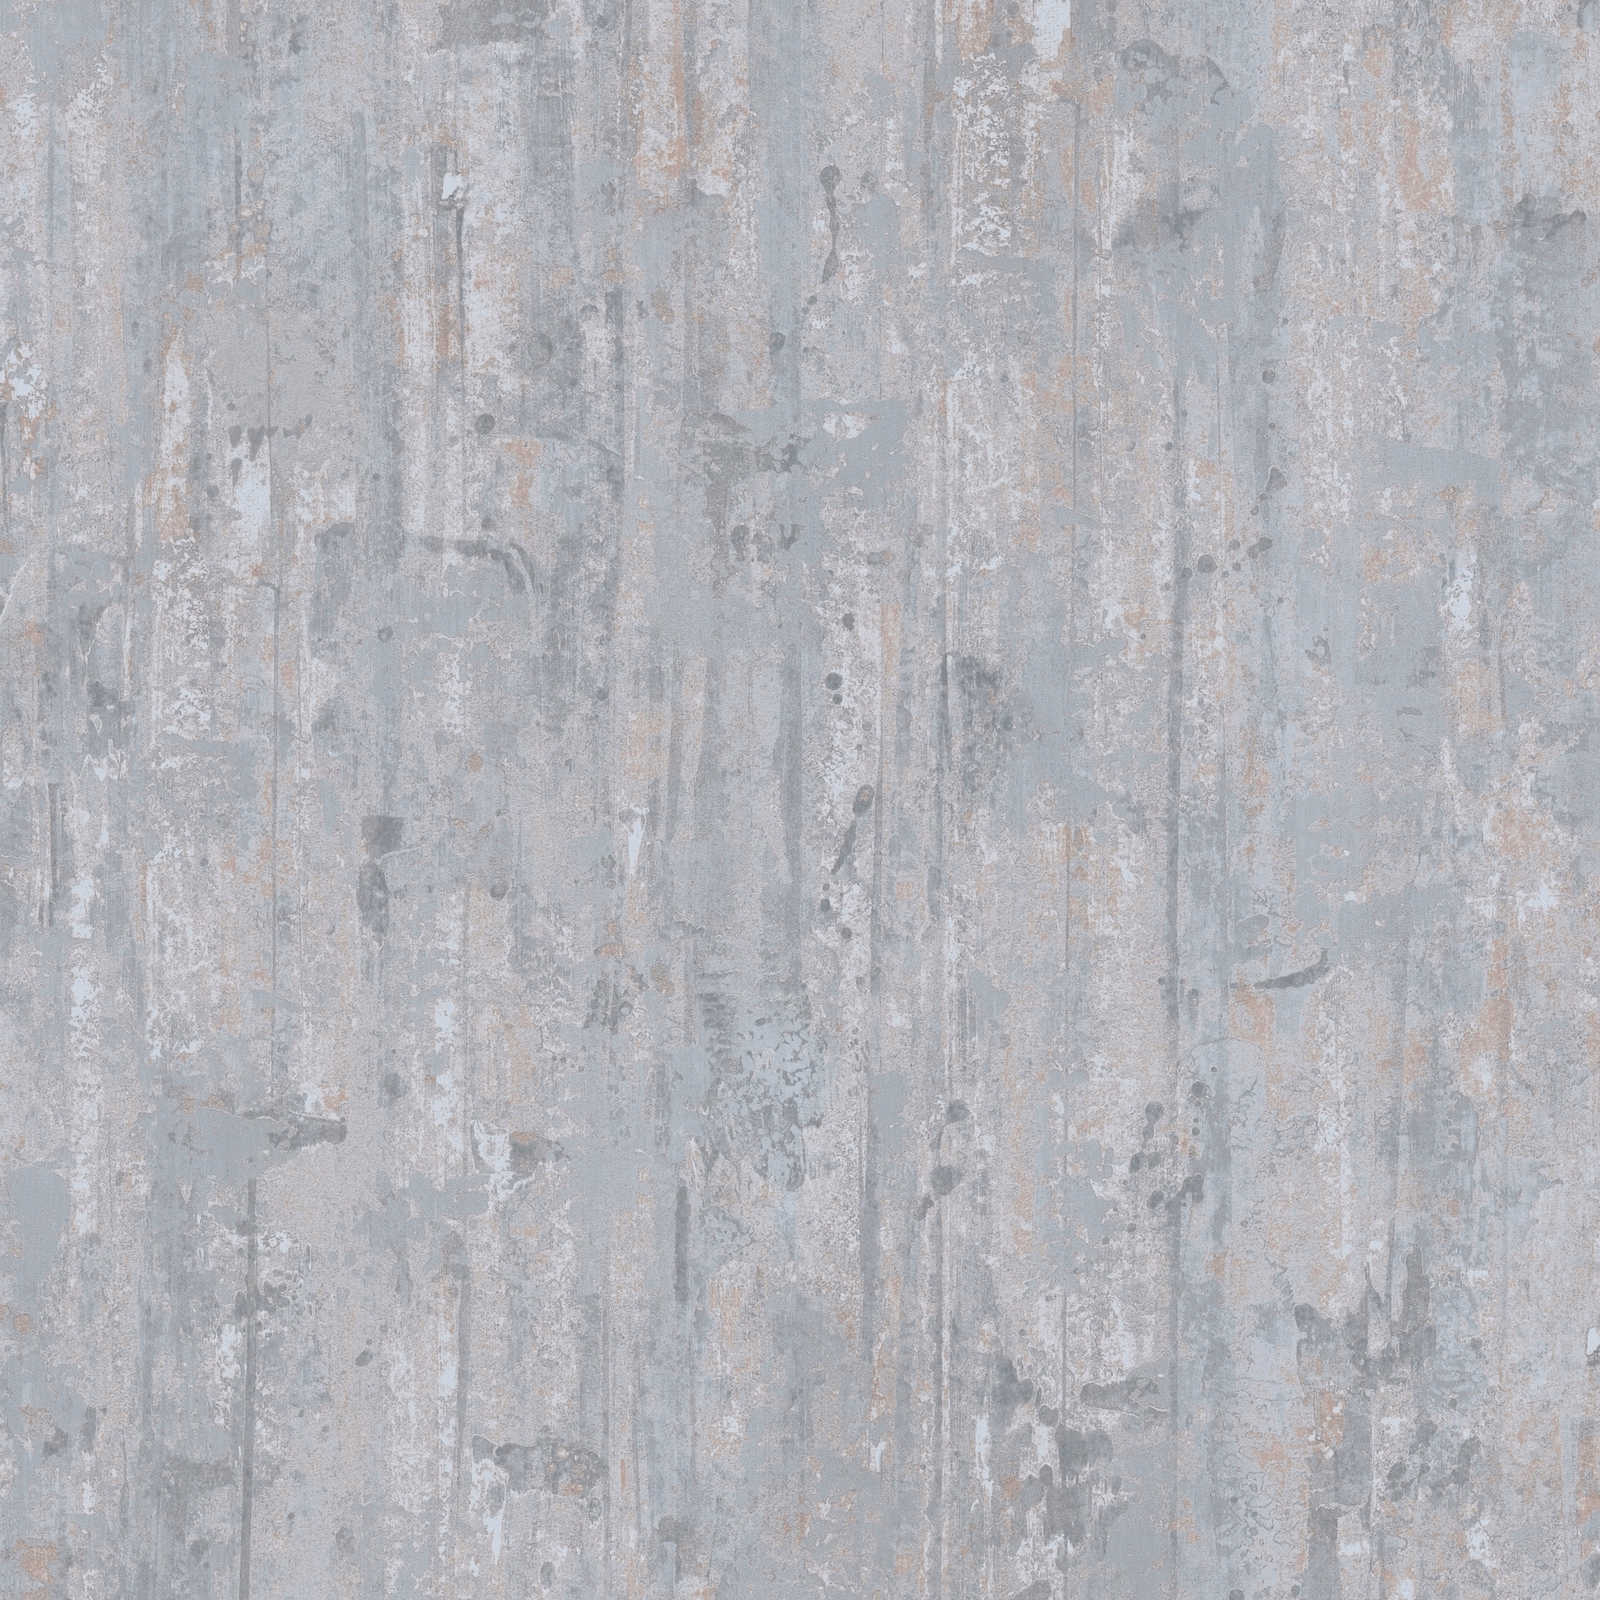 Ethno wallpaper with textured pattern in wood look - grey
